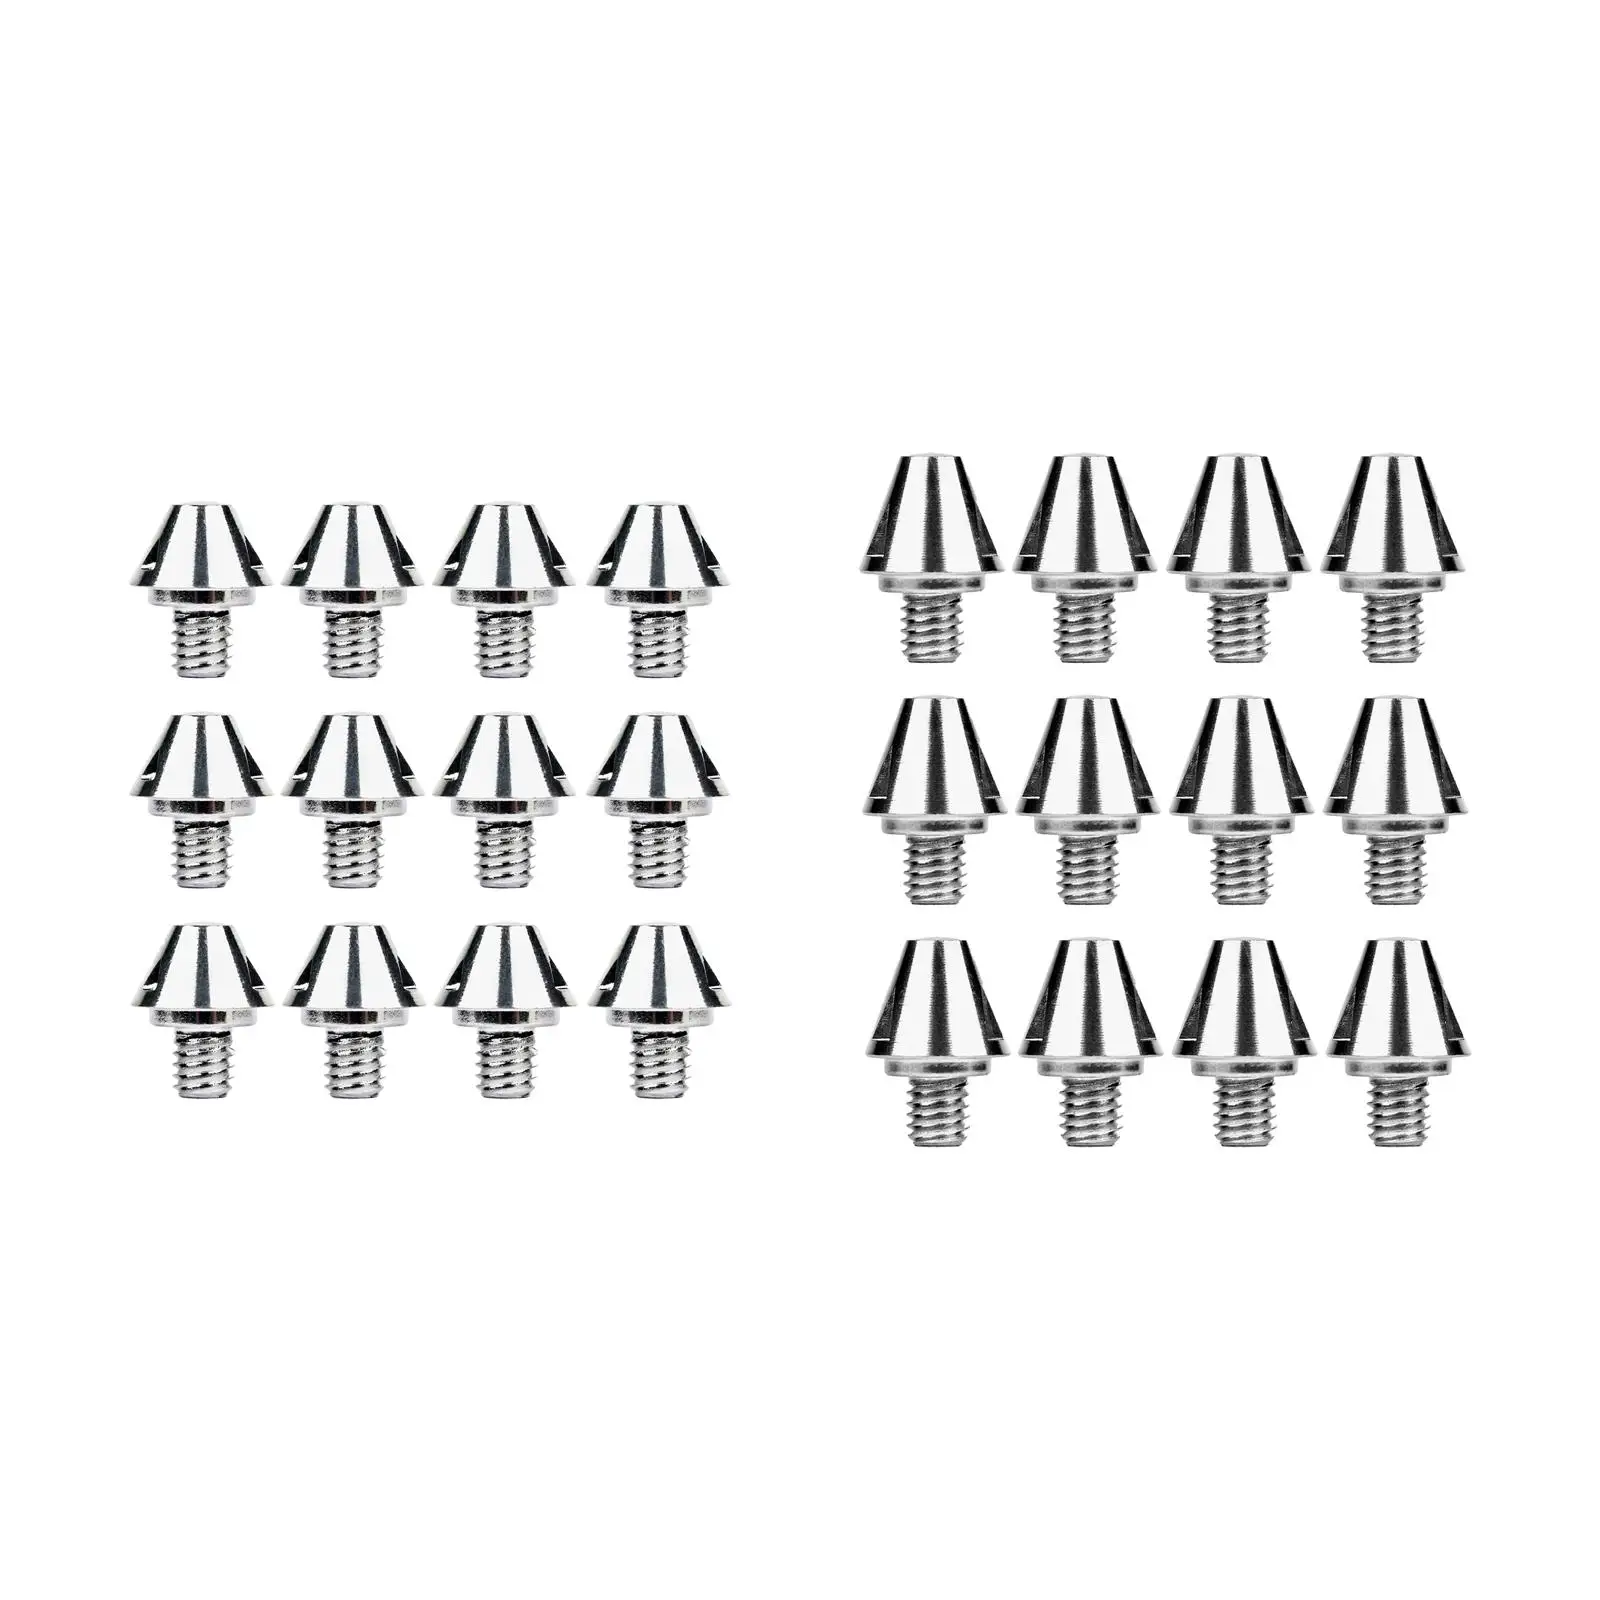 12Pcs Rugby Studs Firm Ground M6 Threading Screw Durable Track Shoes Accessories for Competition Indoor Outdoor Sports Training